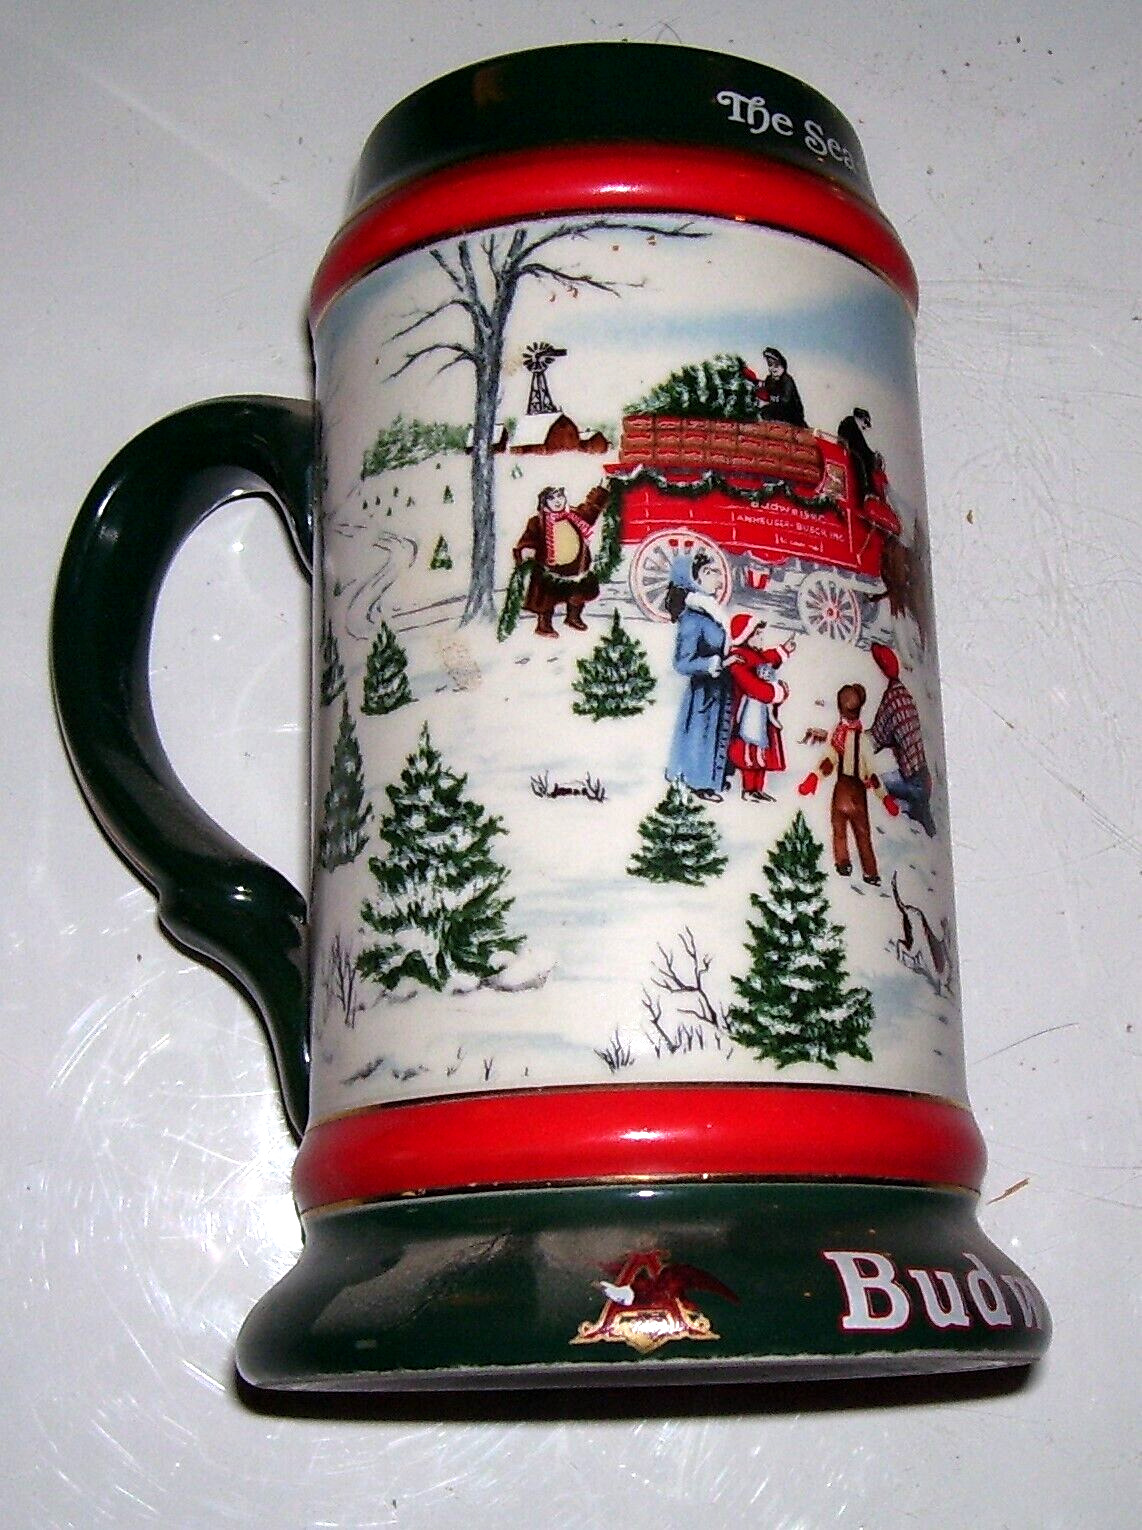 1991 BUDWEISER  HOLIDAY COLLECTORS SERIES STEIN / THE SEASONS BEST